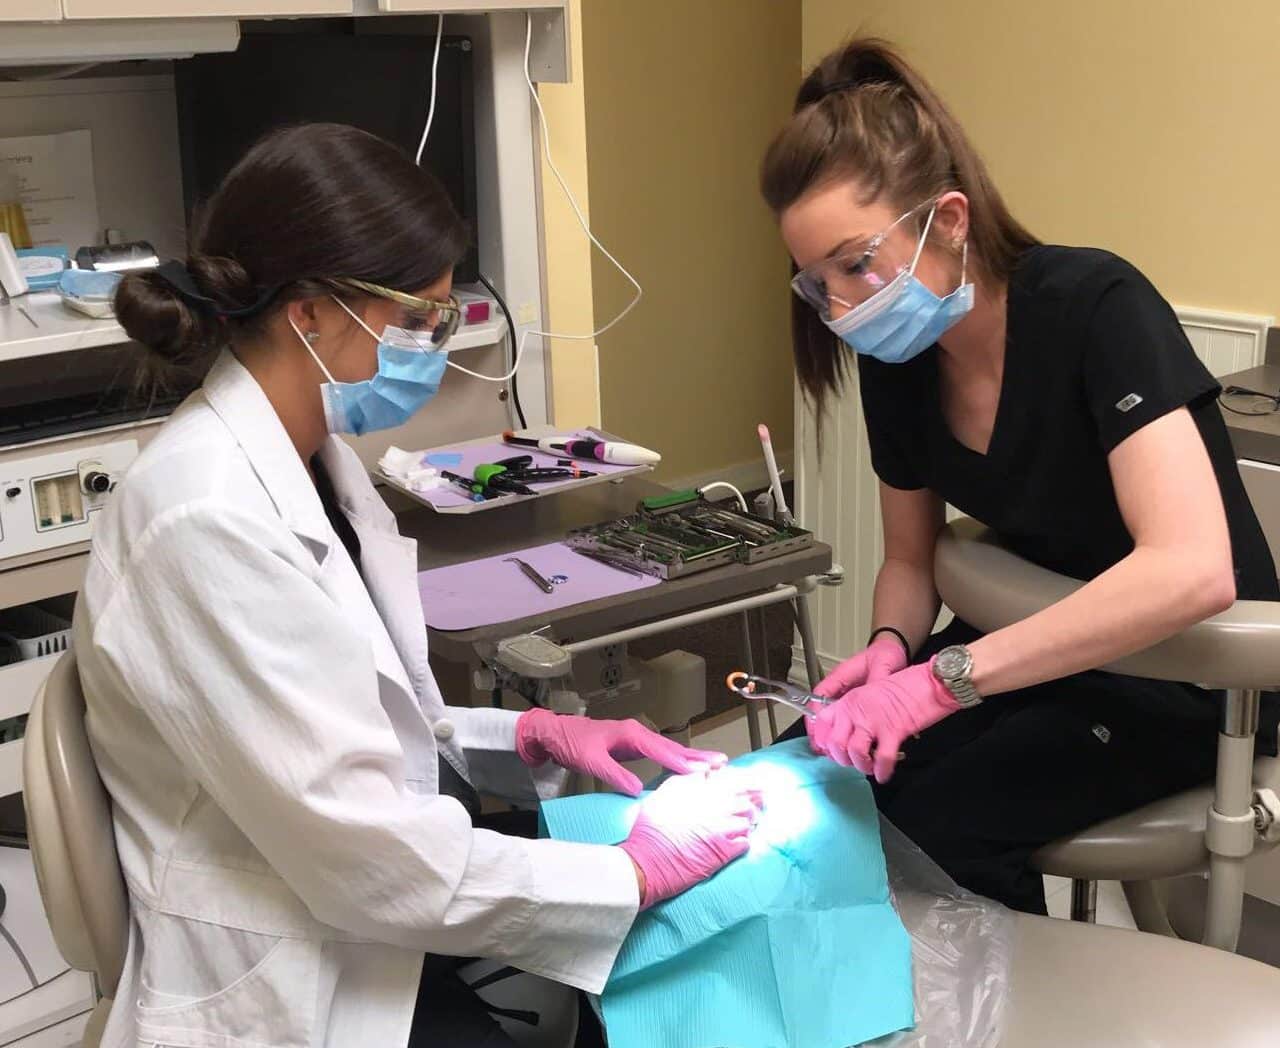 Tulsa Dental Assisting School student learning how to place composite bands.